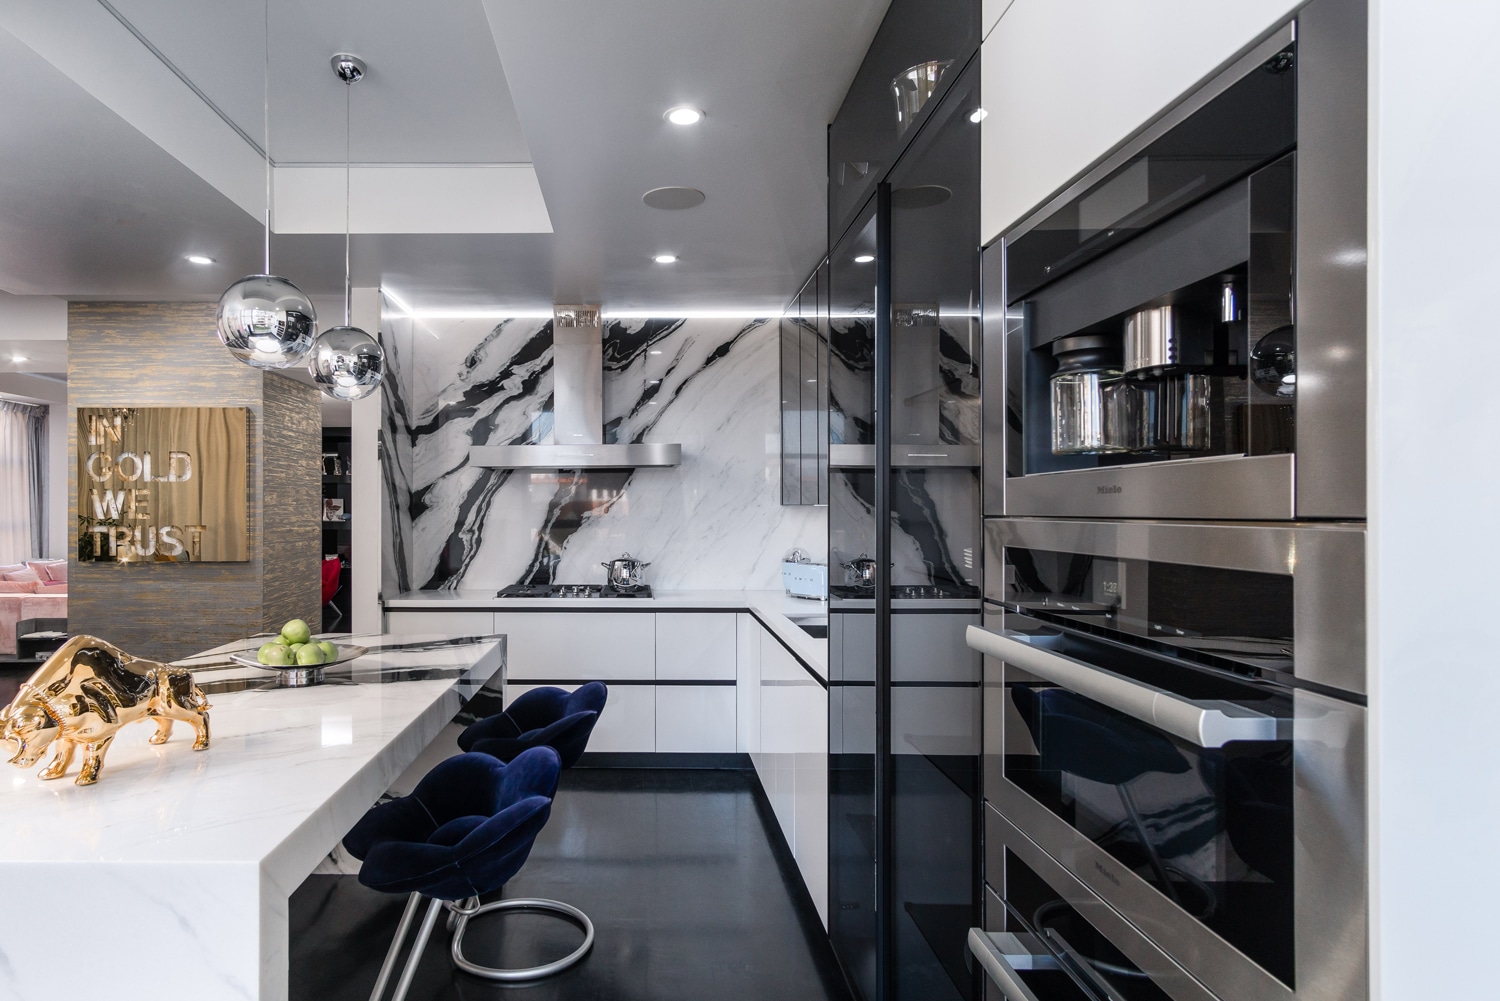 Los Angeles, CA. MandiCasa’s YOTA cabinetry in White Glossy Lacquer and Nero Groove Glossy Lacquer finishes. State-of-the-art appliances from Subzero and Miele. Kitchen island and backsplash in Carrara Panda marble finish. Senior Designer Consultant of MandiCasa Los Angeles, Reba Sams.
